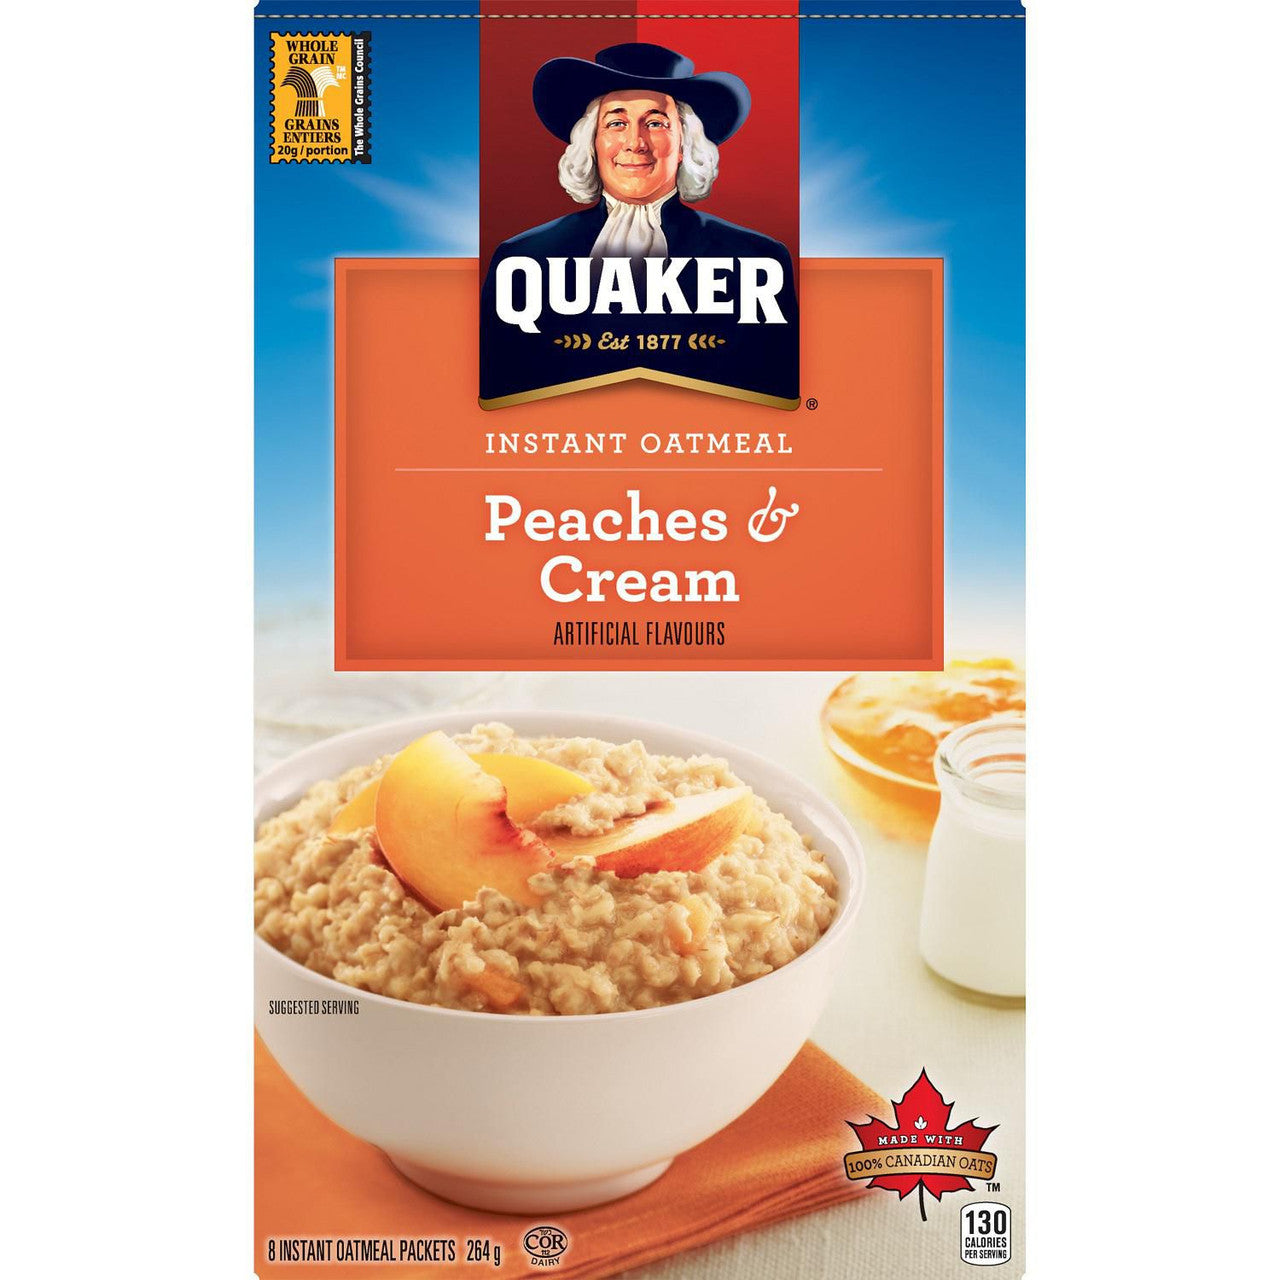 Quaker Peaches & Cream Flavor Instant Oatmeal, 8 packets, 264g/9.2 oz. Box (Imported from Canada)